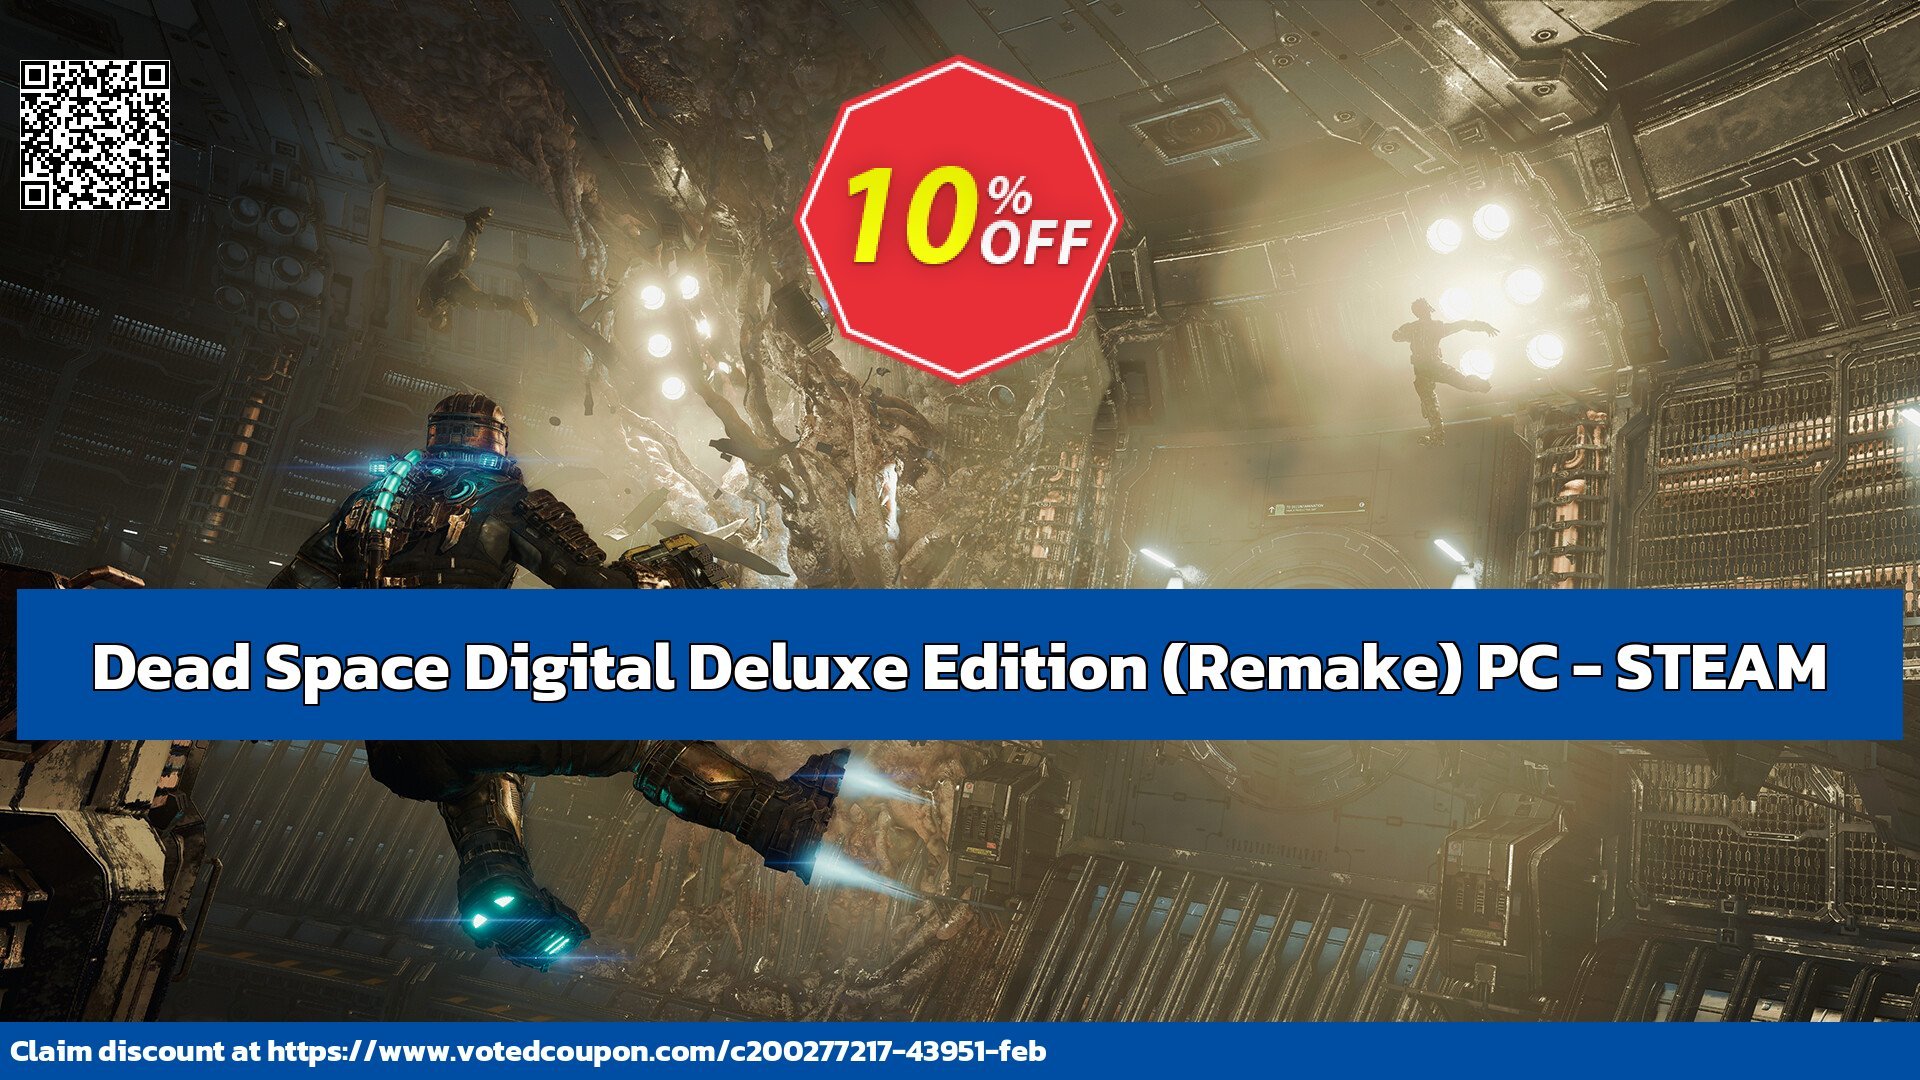 Dead Space Digital Deluxe Edition, Remake PC - STEAM Coupon, discount Dead Space Digital Deluxe Edition (Remake) PC - STEAM Deal CDkeys. Promotion: Dead Space Digital Deluxe Edition (Remake) PC - STEAM Exclusive Sale offer